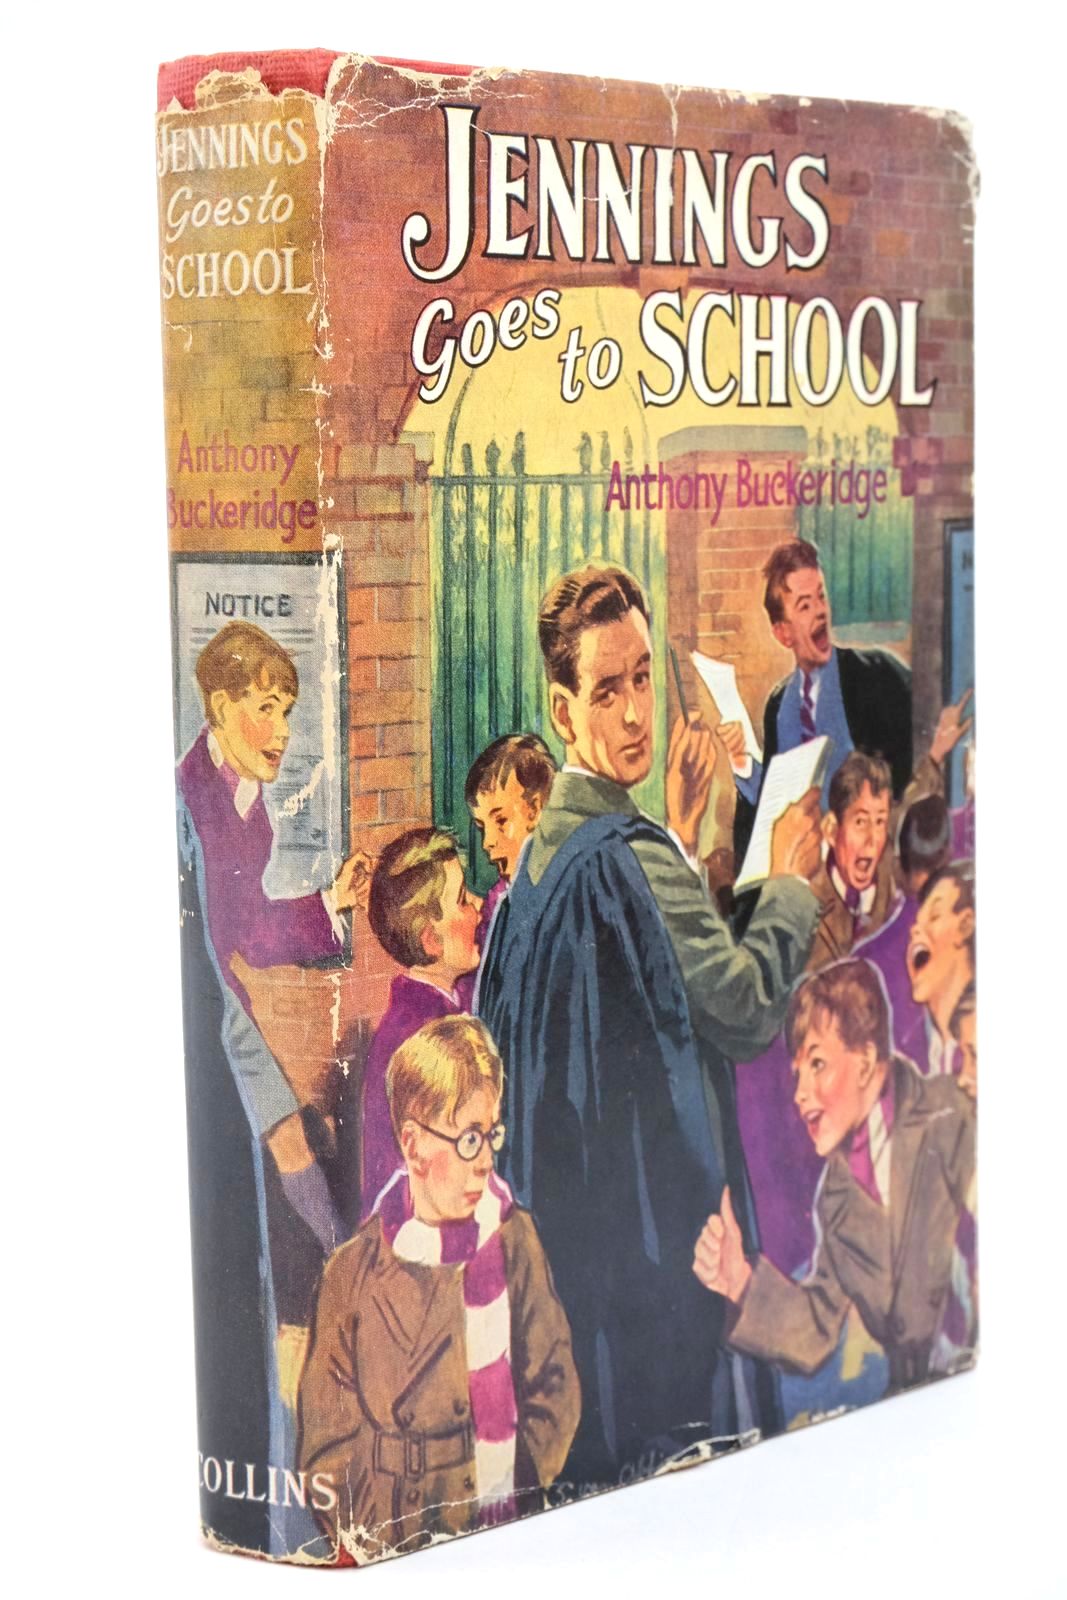 Photo of JENNINGS GOES TO SCHOOL written by Buckeridge, Anthony published by Collins (STOCK CODE: 1322826)  for sale by Stella & Rose's Books